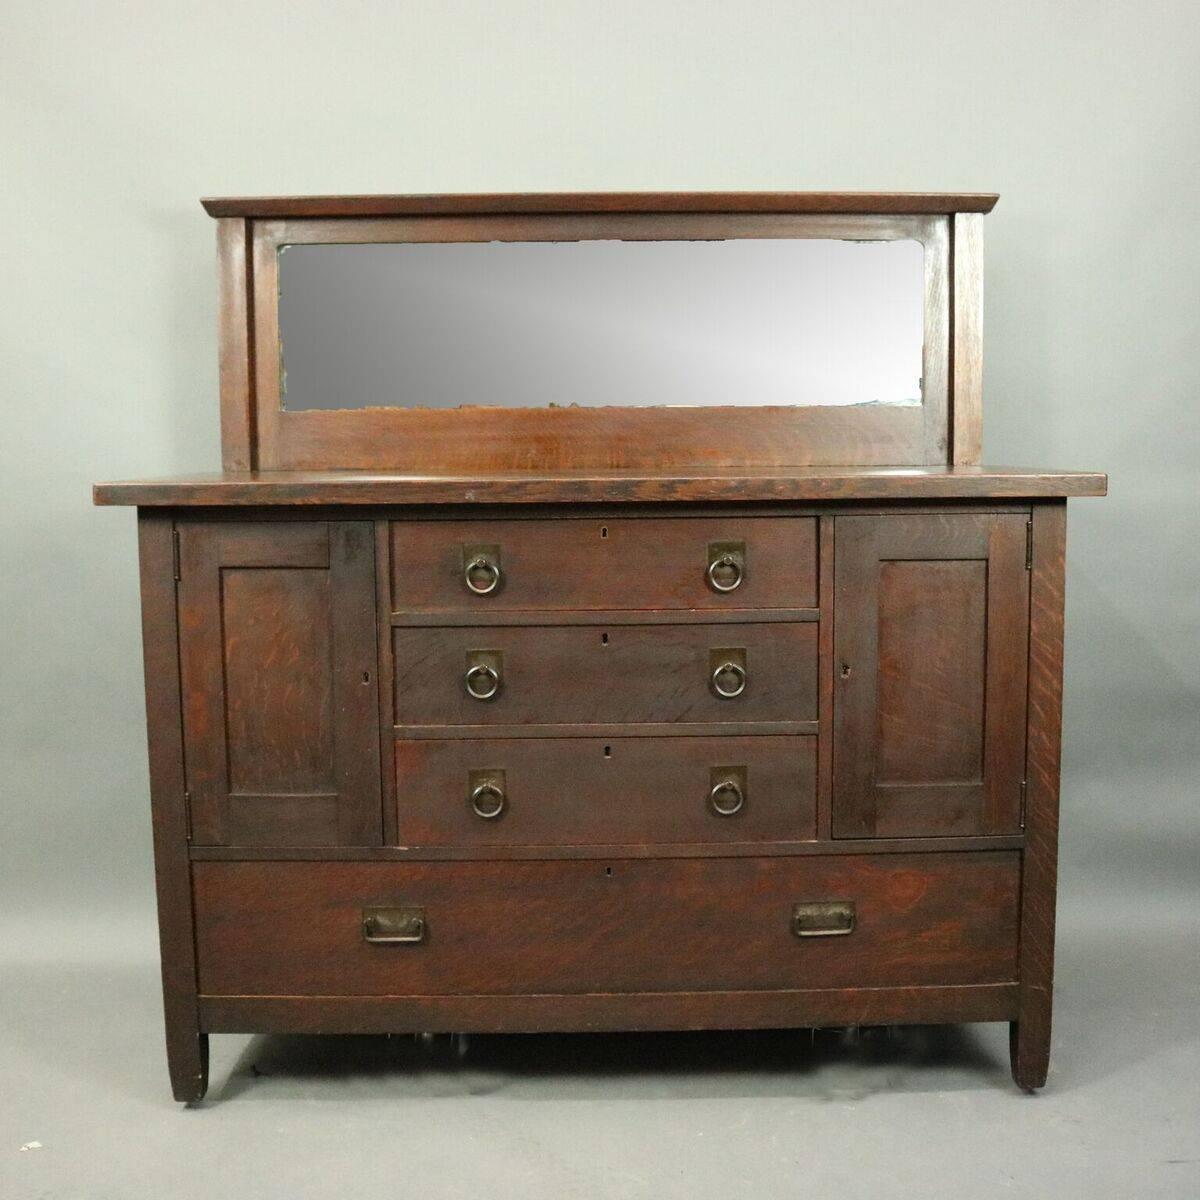 Antique Arts and Crafts mission oak Stickley Brothers sideboard with three central drawers flanked by storage cabinets above one long drawer, mirrored backsplash, bronze hardware, circa 1920.

Measures - 53.5" H X 54" W X 23.5" D,